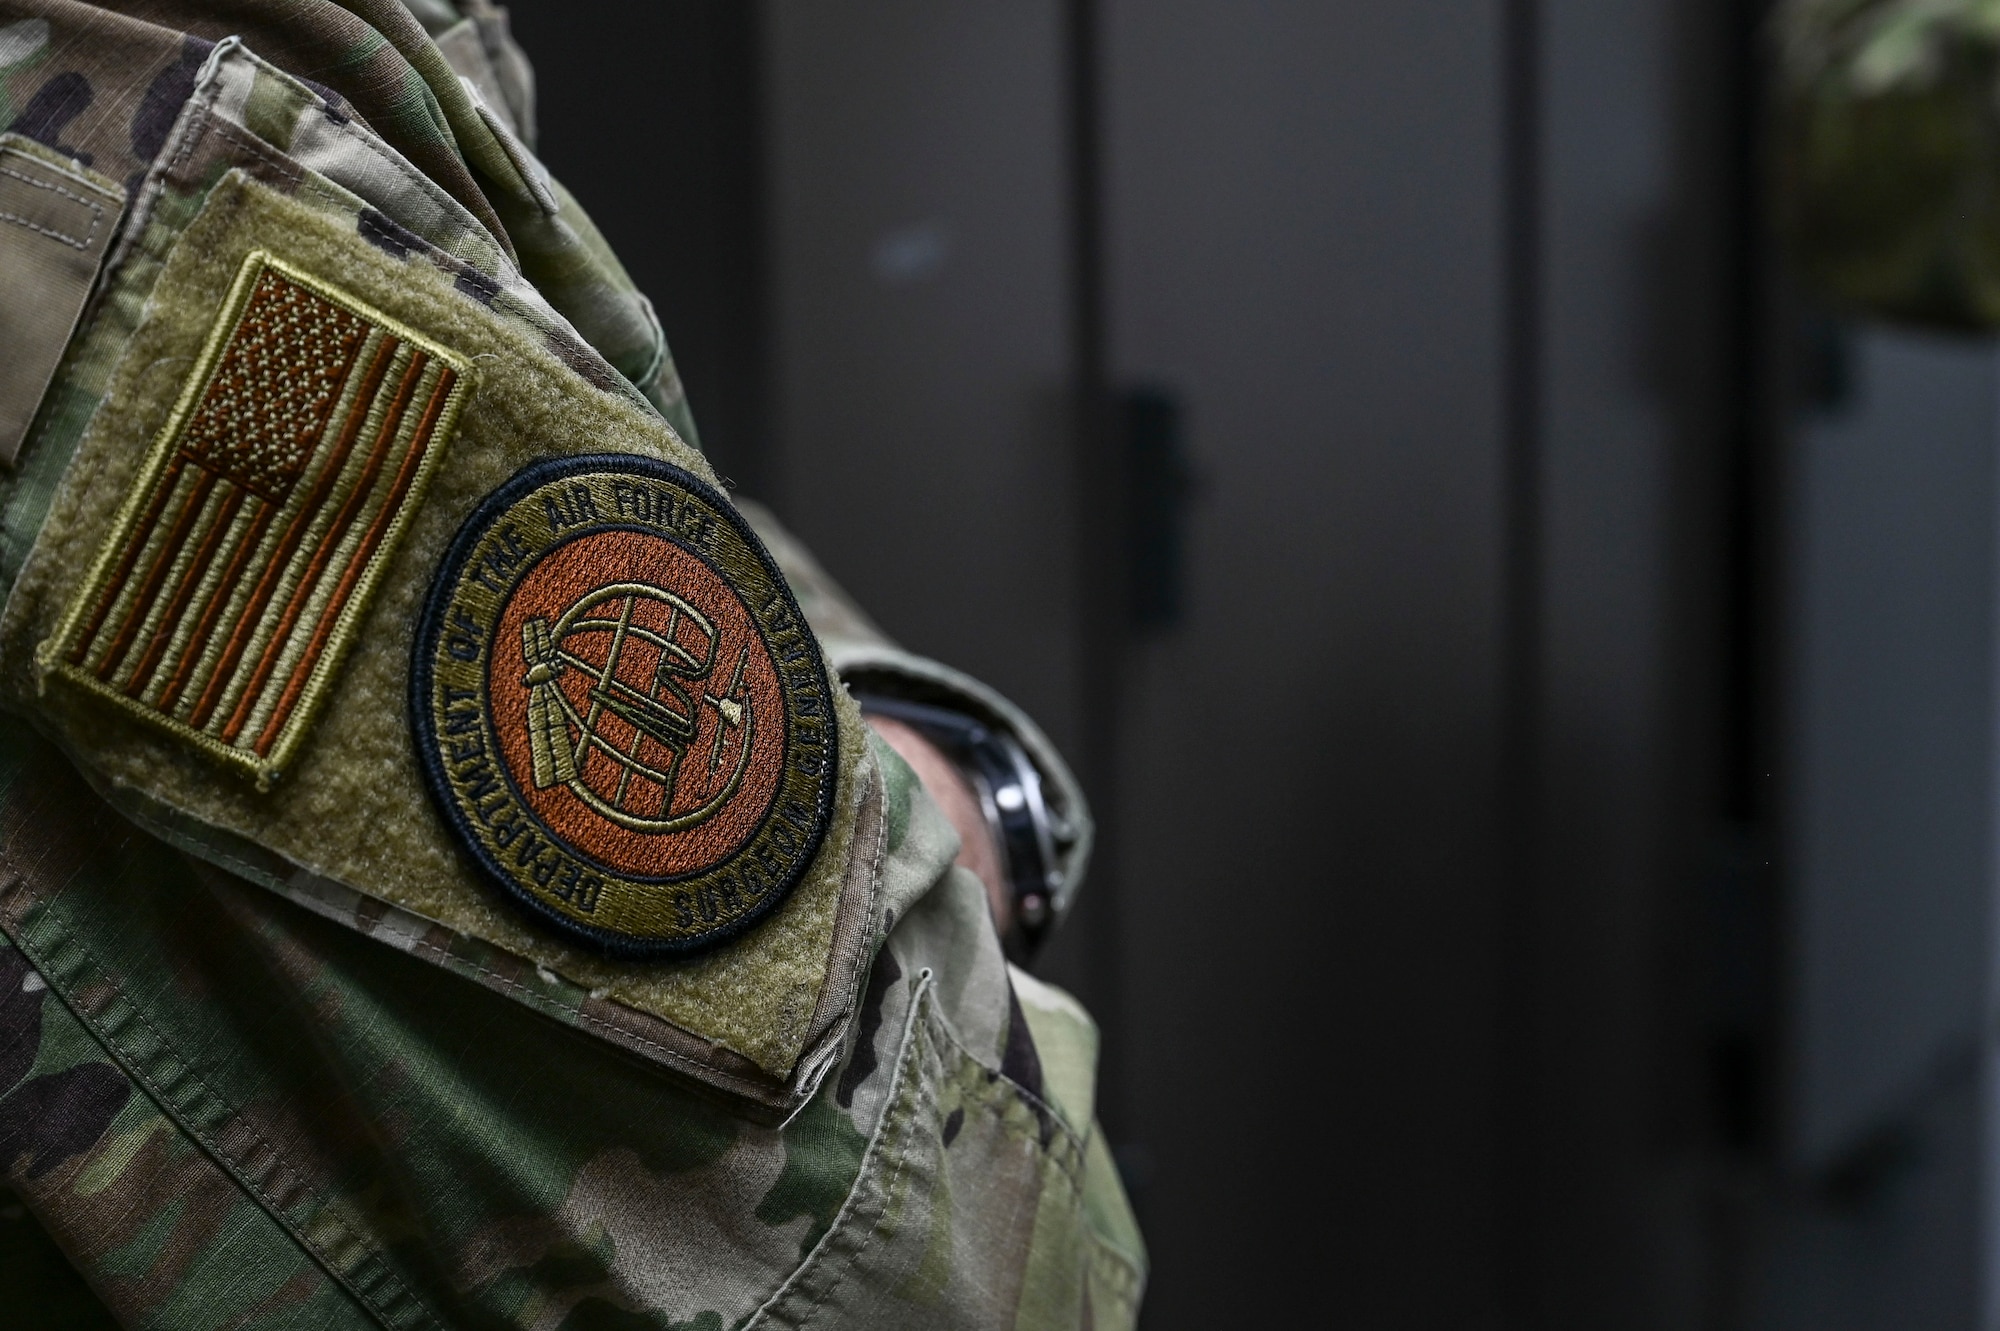 A patch is shown on an General's arm.